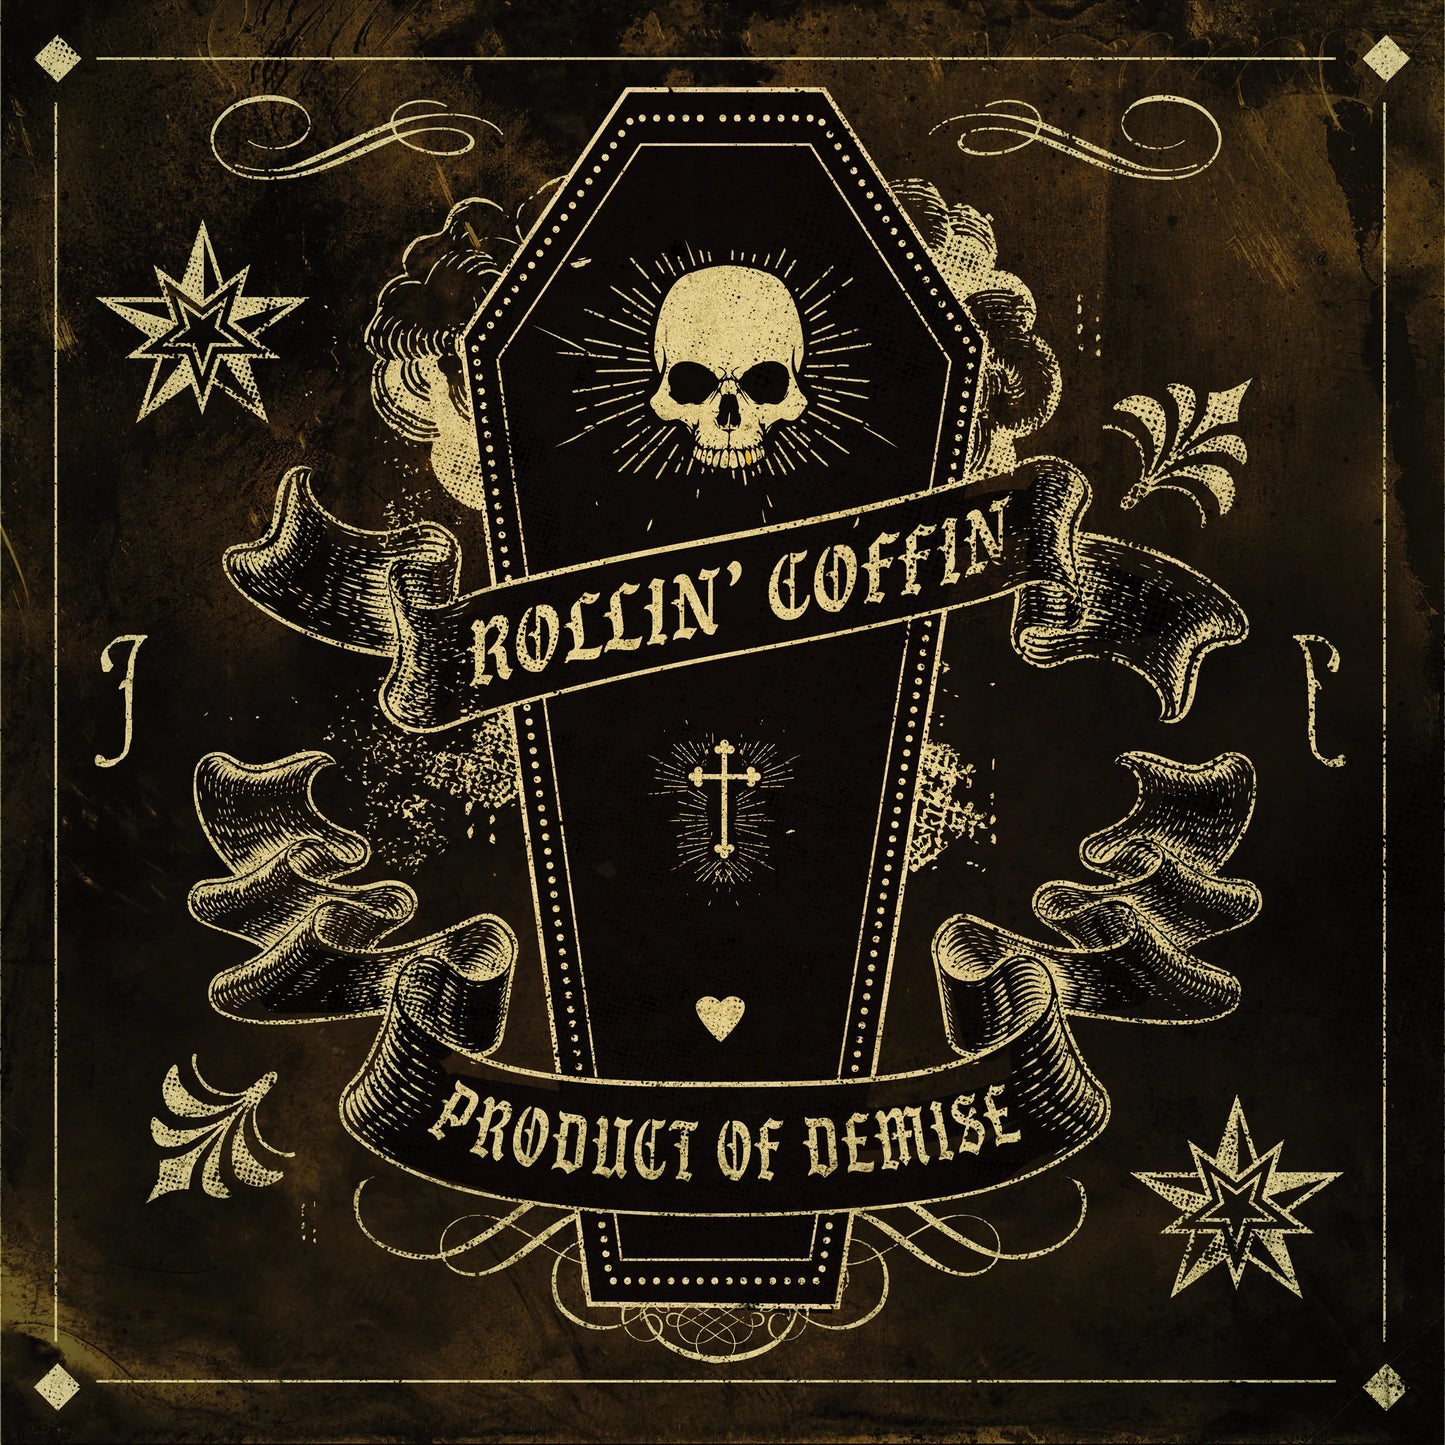 Rollin' Coffin - Product Of Demise CD